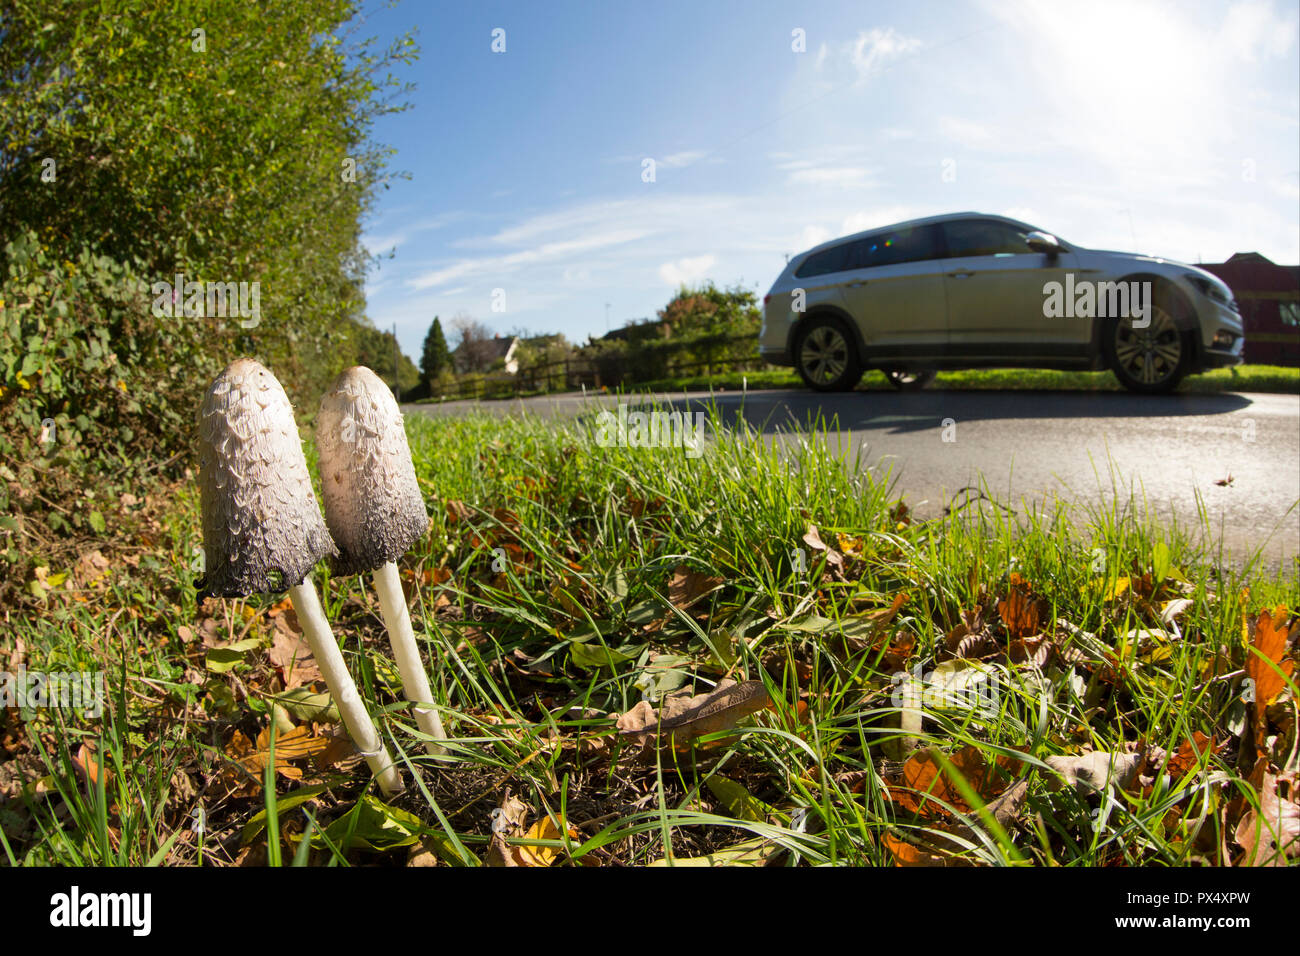 Lawyer’s wig, or shaggy inkcap, fungi Coprinus comatus, growing on a grass verge at the side of a road in Hampshire England UK GB. Stock Photo